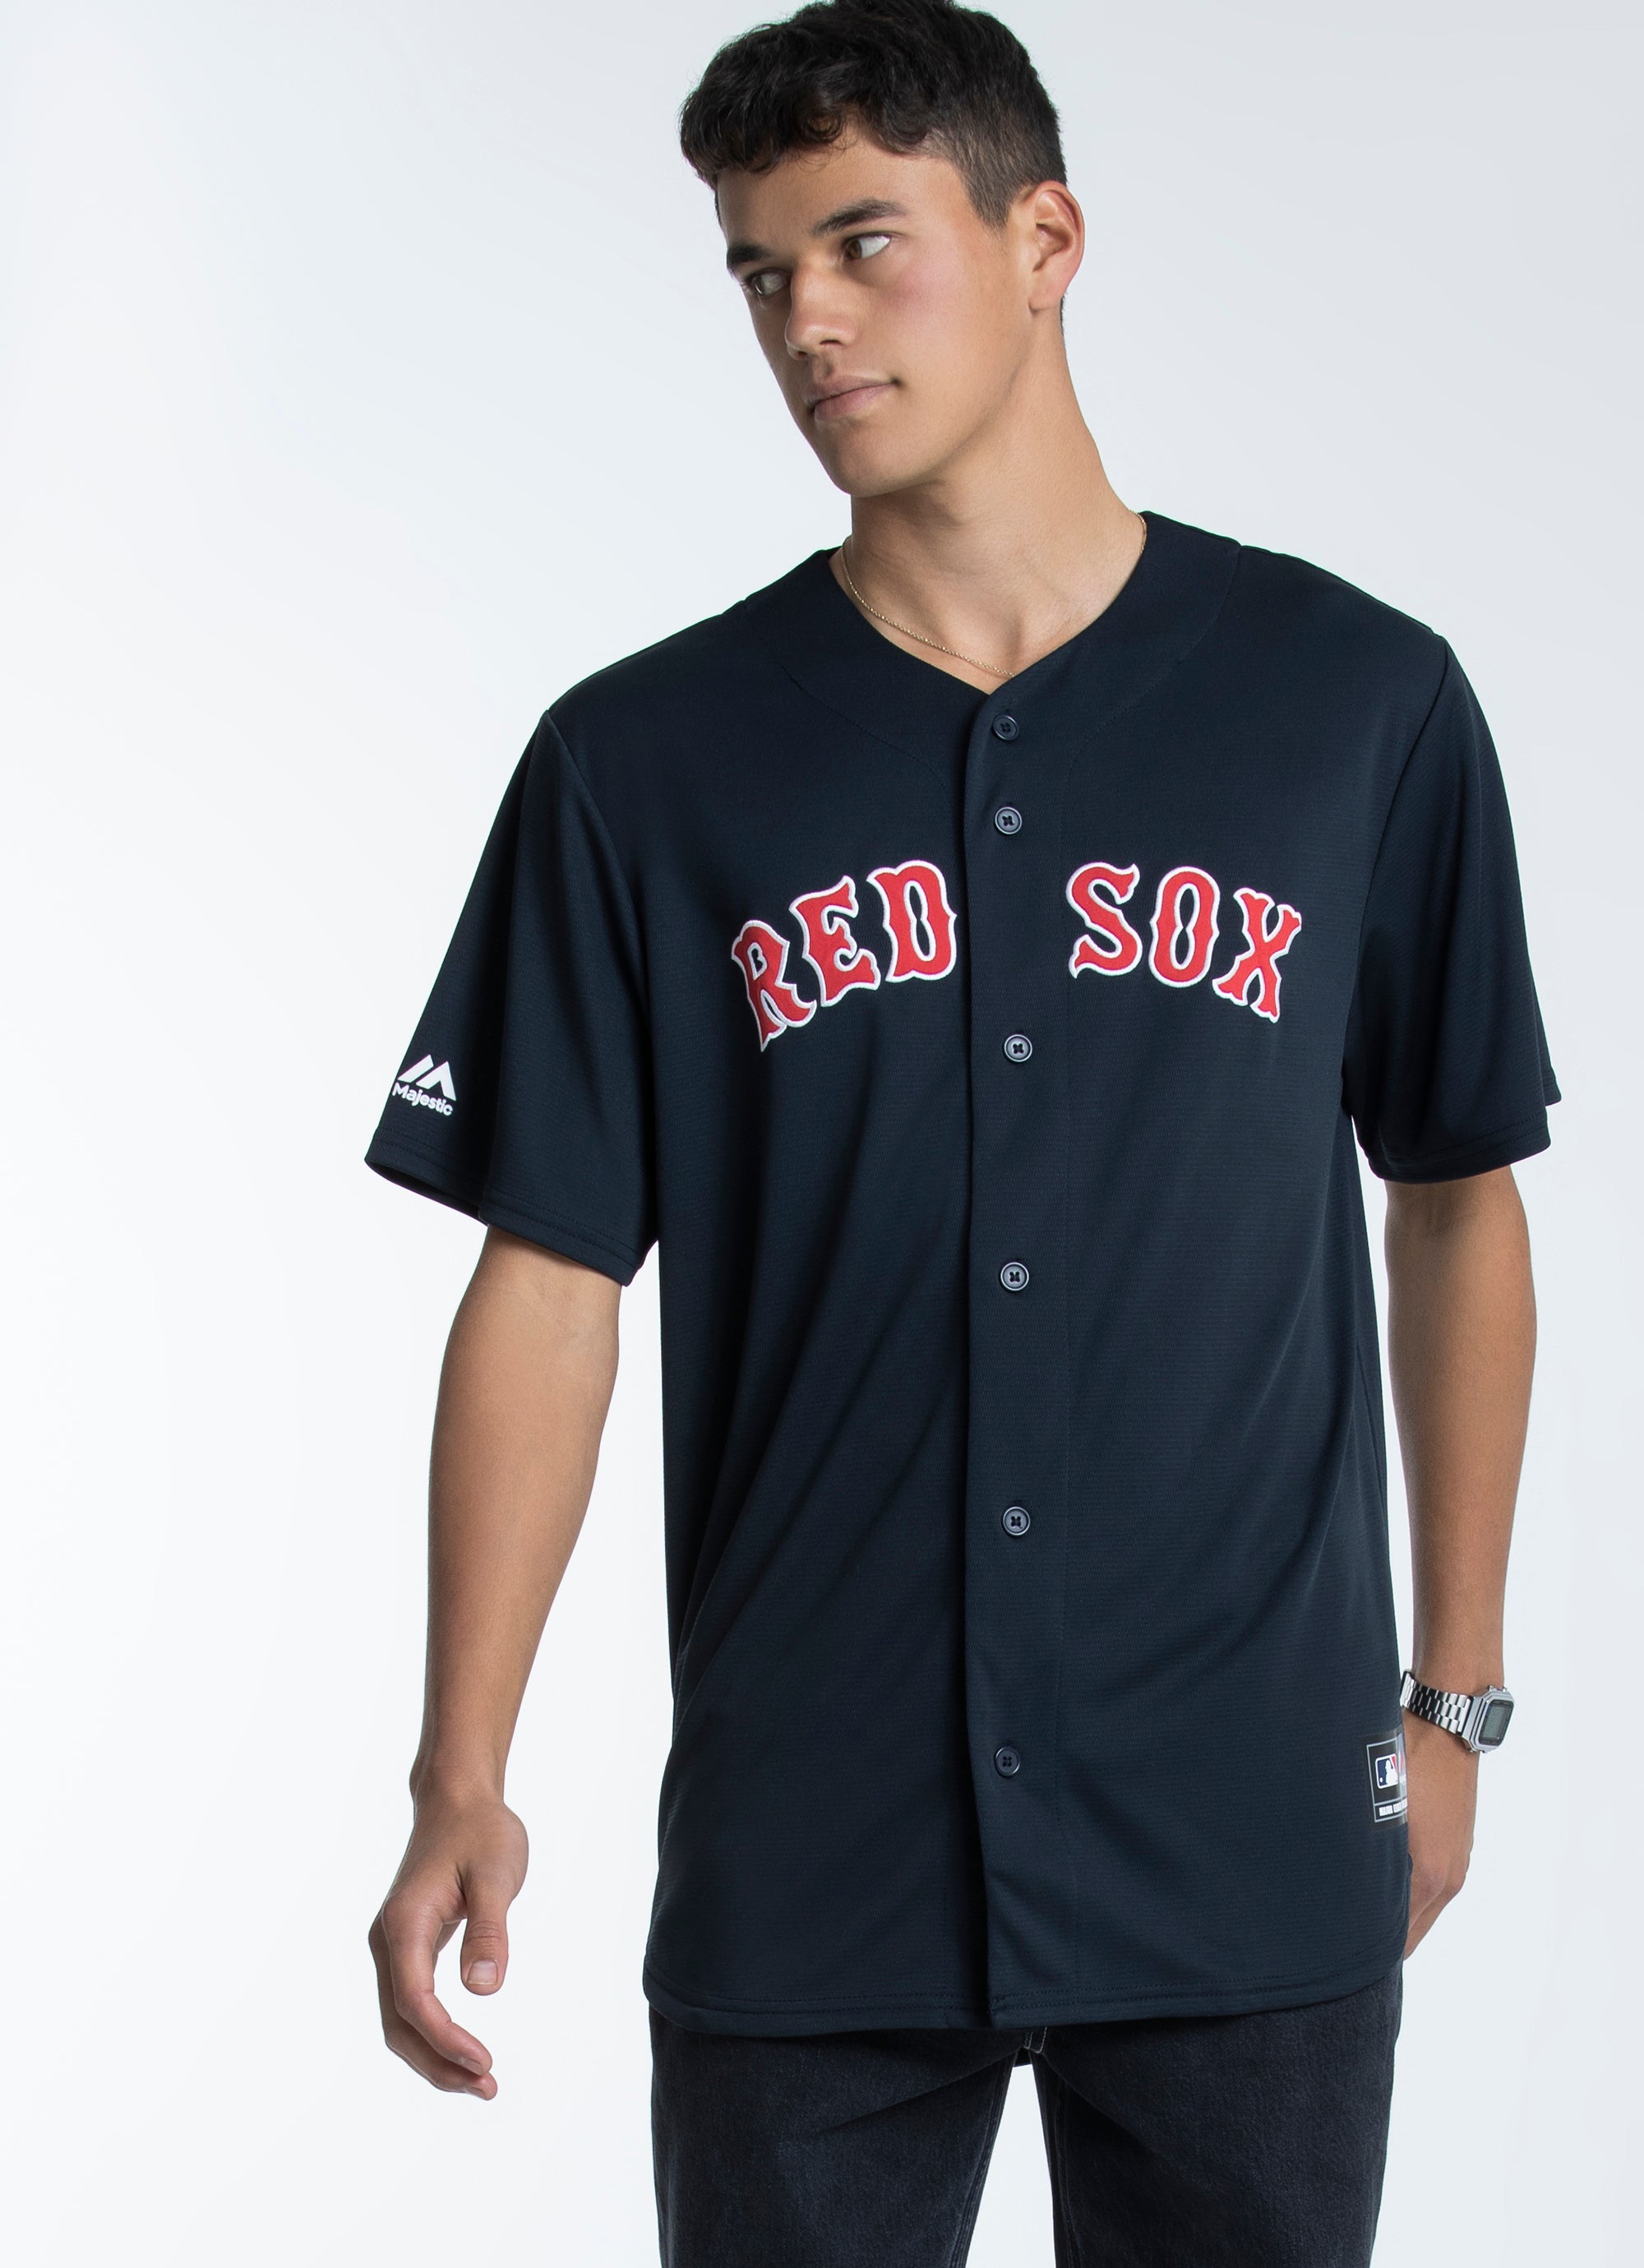 majestic red sox jersey